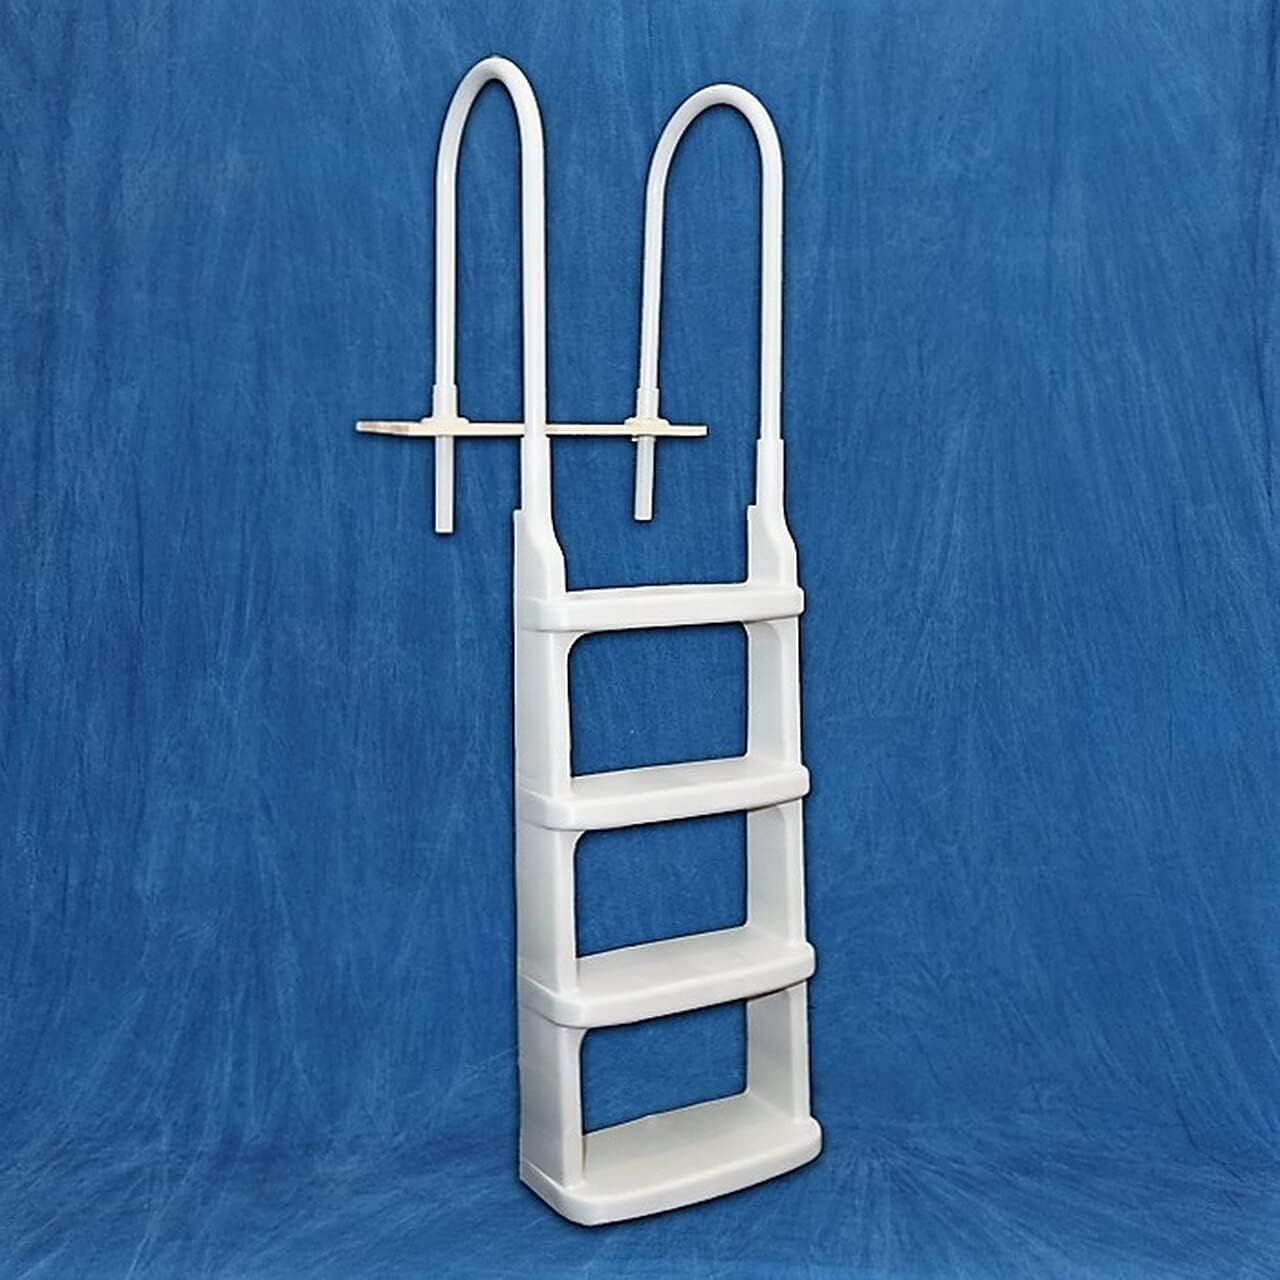 Main Access Easy Incline White Pool Deck Ladder for 48 to 54 Inch Above Ground Pools